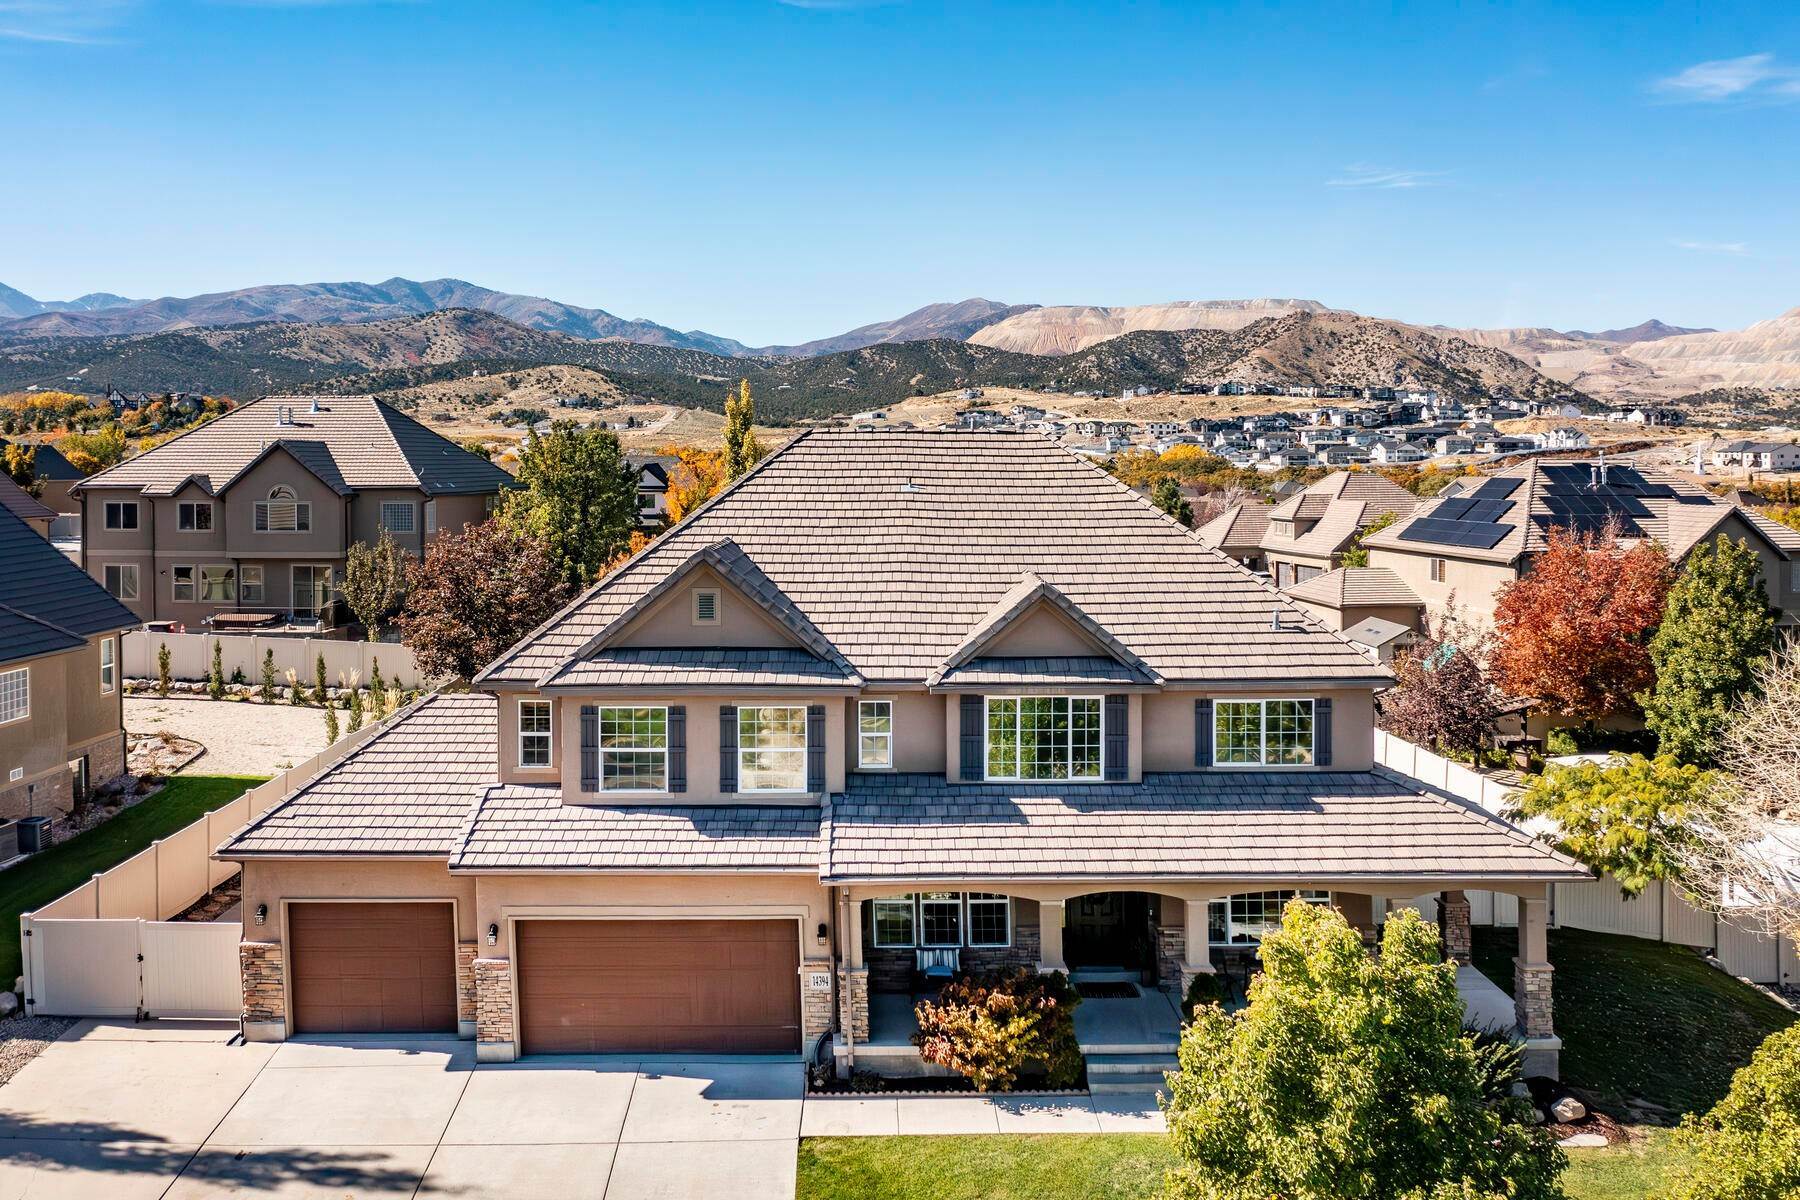 29. Single Family Homes for Sale at This Herriman Cove Home Offers Proximity to a Pond, Trails, and a Community Pool 14394 S Long Ridge Drive Herriman, Utah 84096 United States